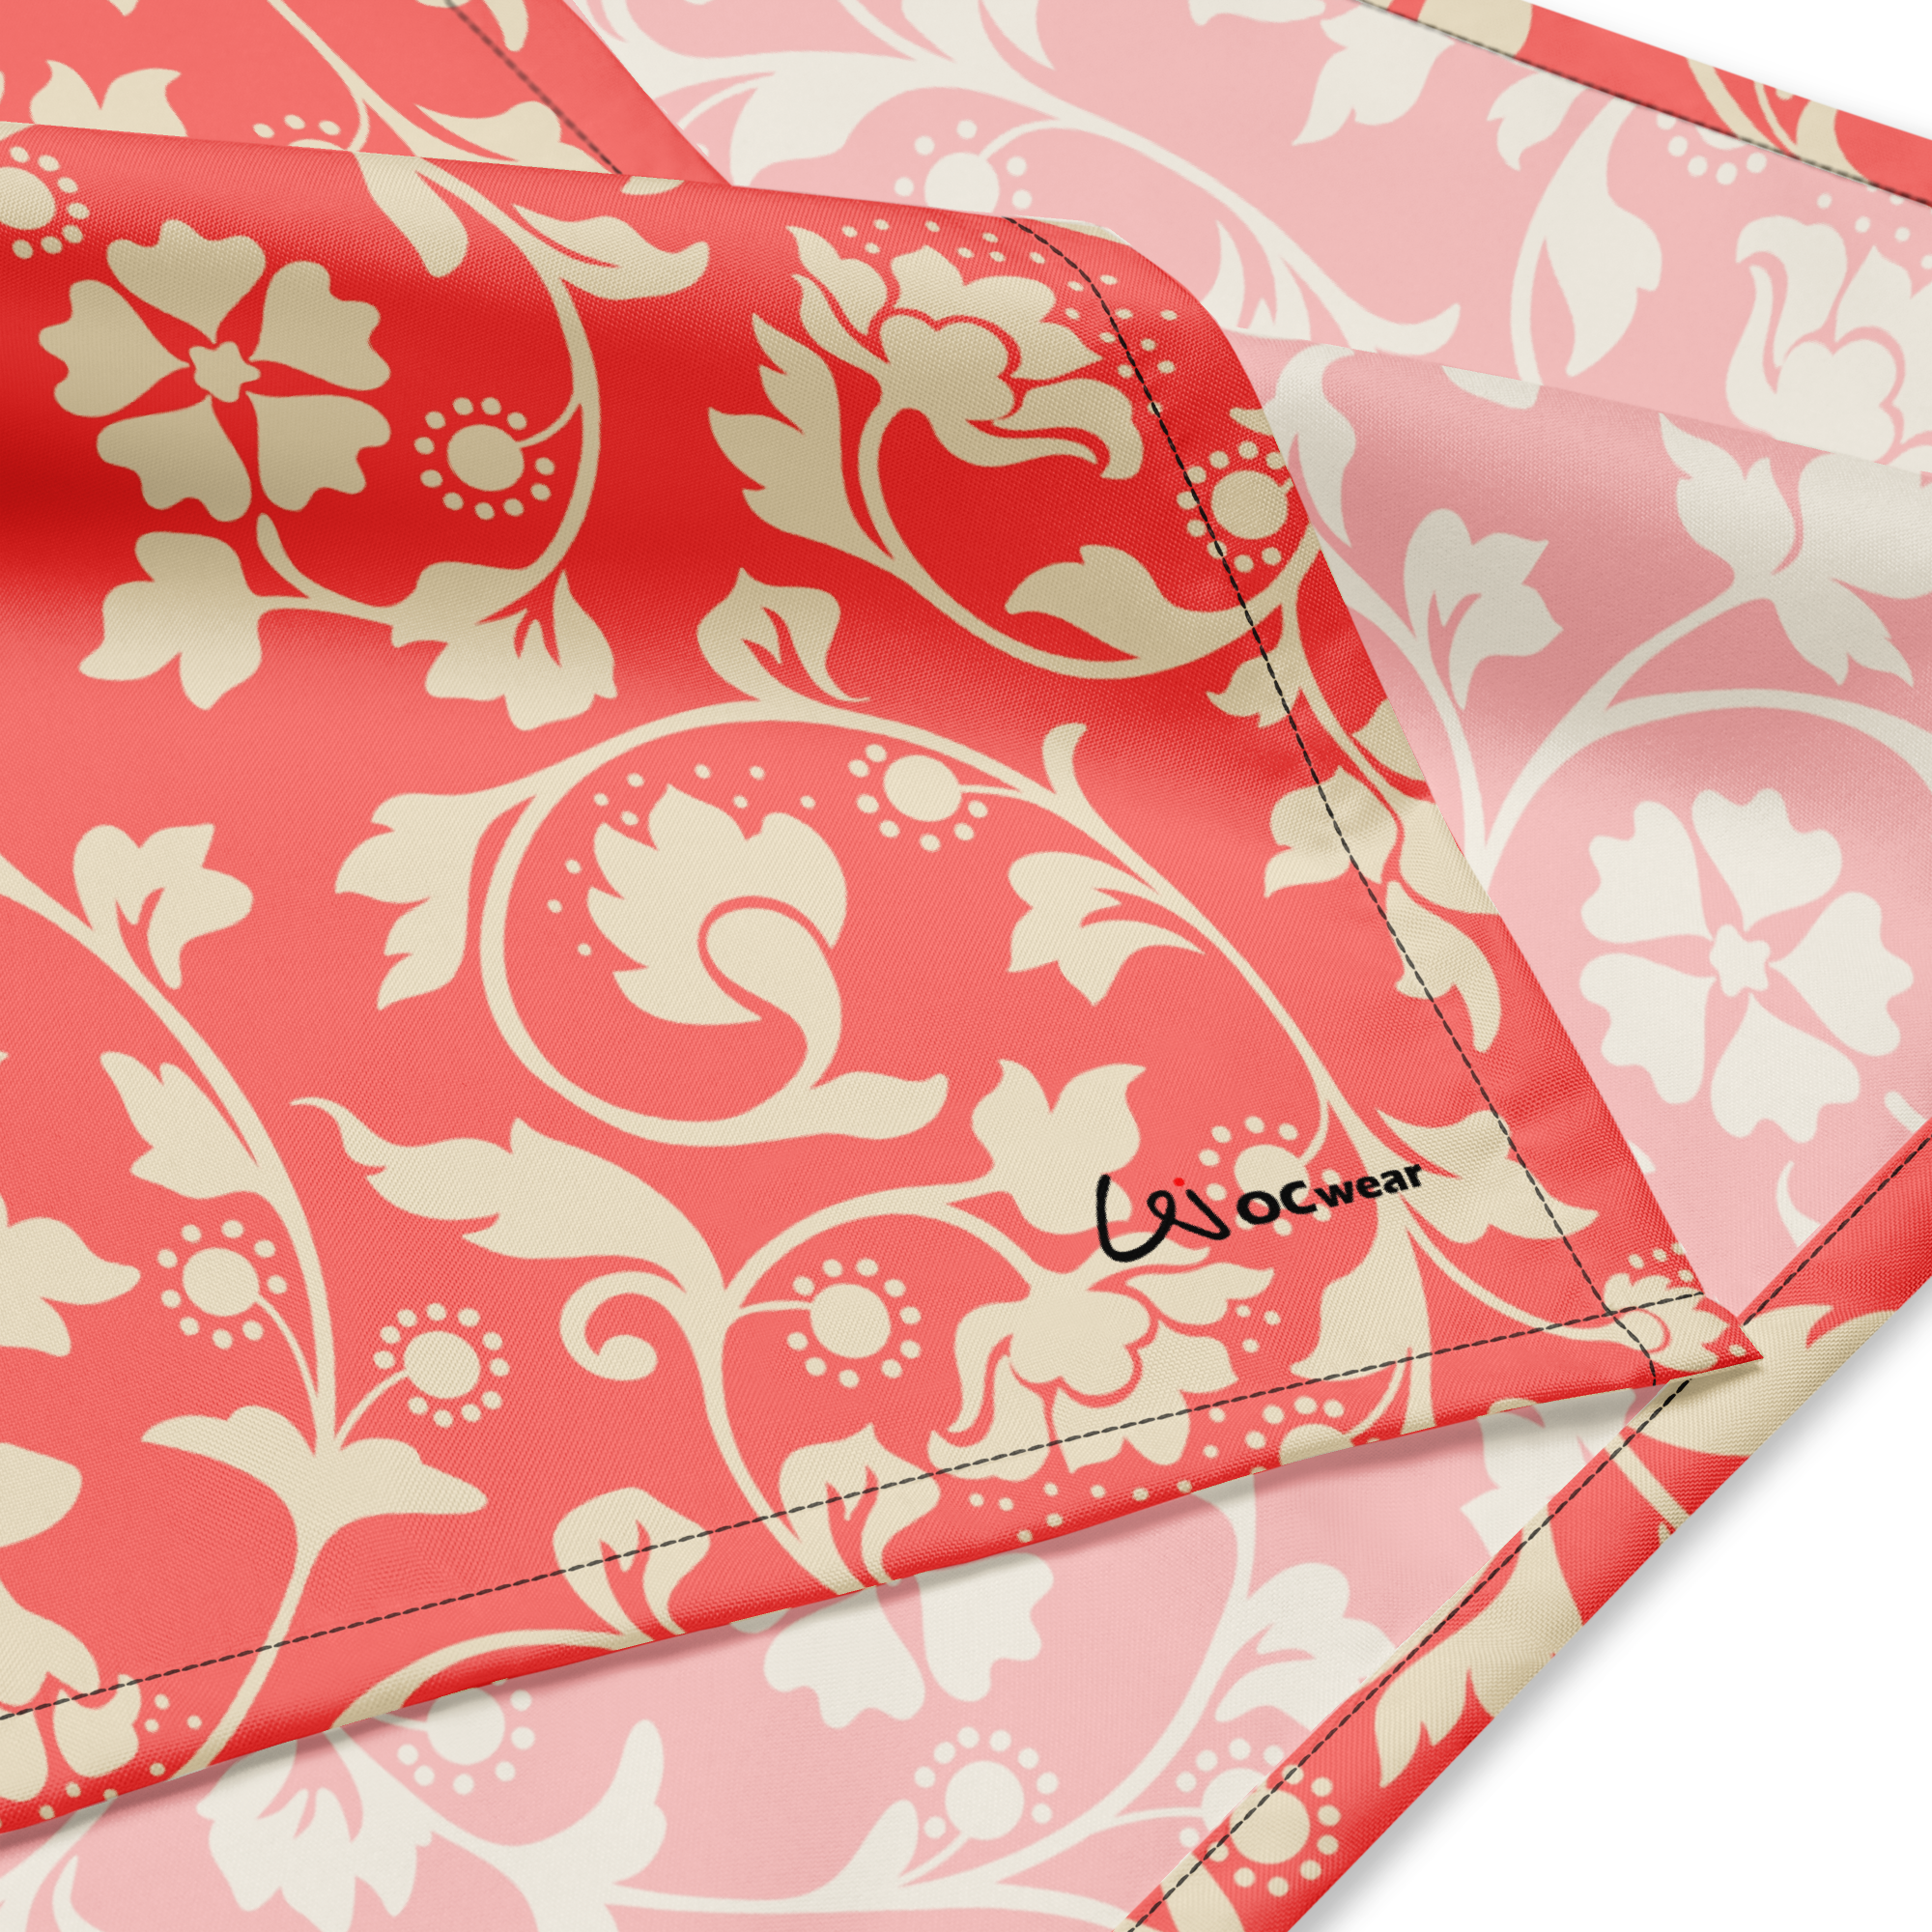 all-over-print-bandana-white-l-product-details-6471ae3f79669.png